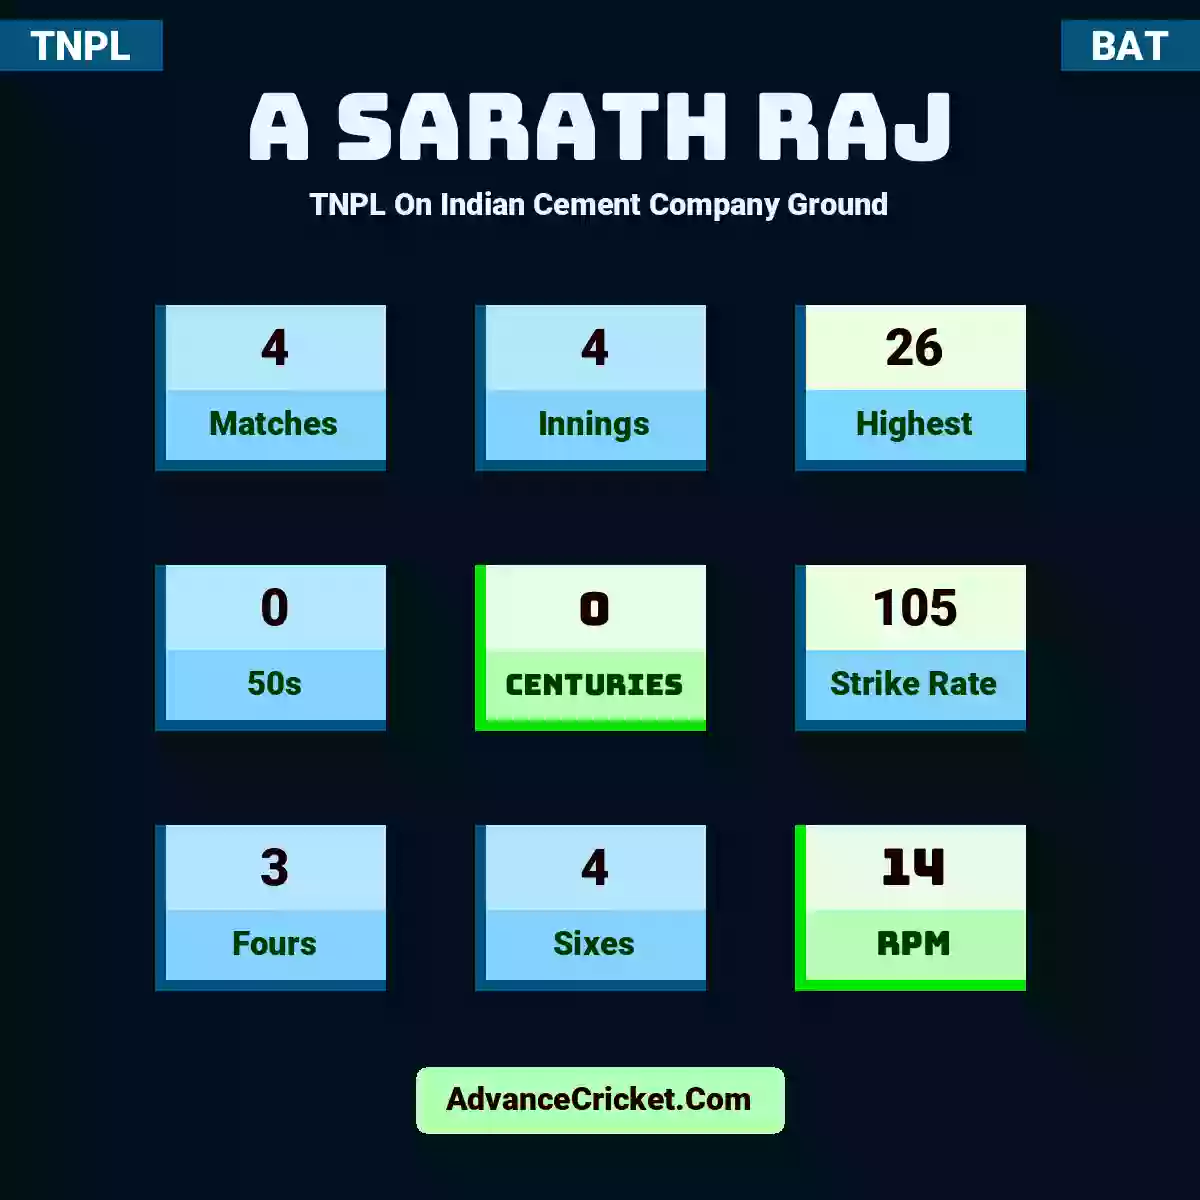 A Sarath Raj TNPL  On Indian Cement Company Ground, A Sarath Raj played 4 matches, scored 26 runs as highest, 0 half-centuries, and 0 centuries, with a strike rate of 105. A.Raj hit 3 fours and 4 sixes, with an RPM of 14.